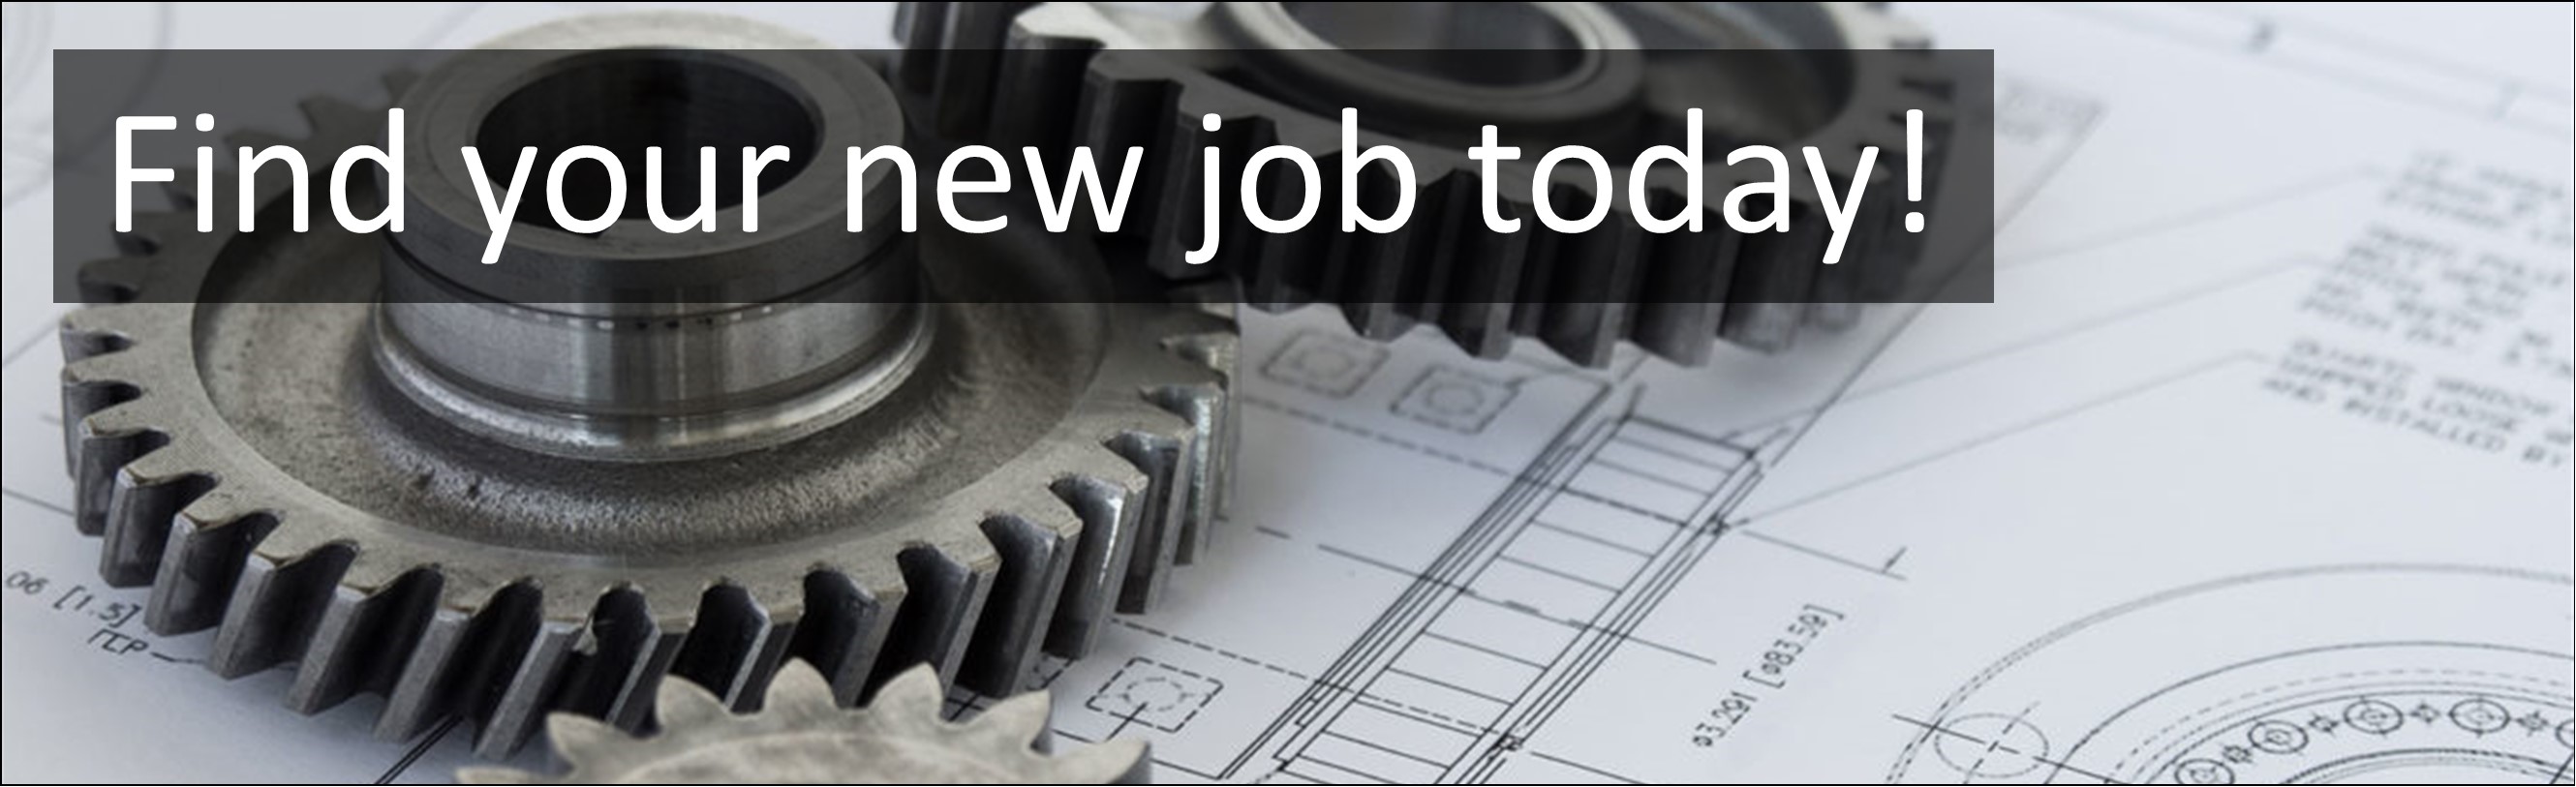 Engineering Jobs. Maintenance Operative Jobs, Careers & Vacancies in Leicester, Leicestershire, East Midlands Advertised by AWD online – Multi-Job Board Advertising and CV Sourcing Recruitment Services